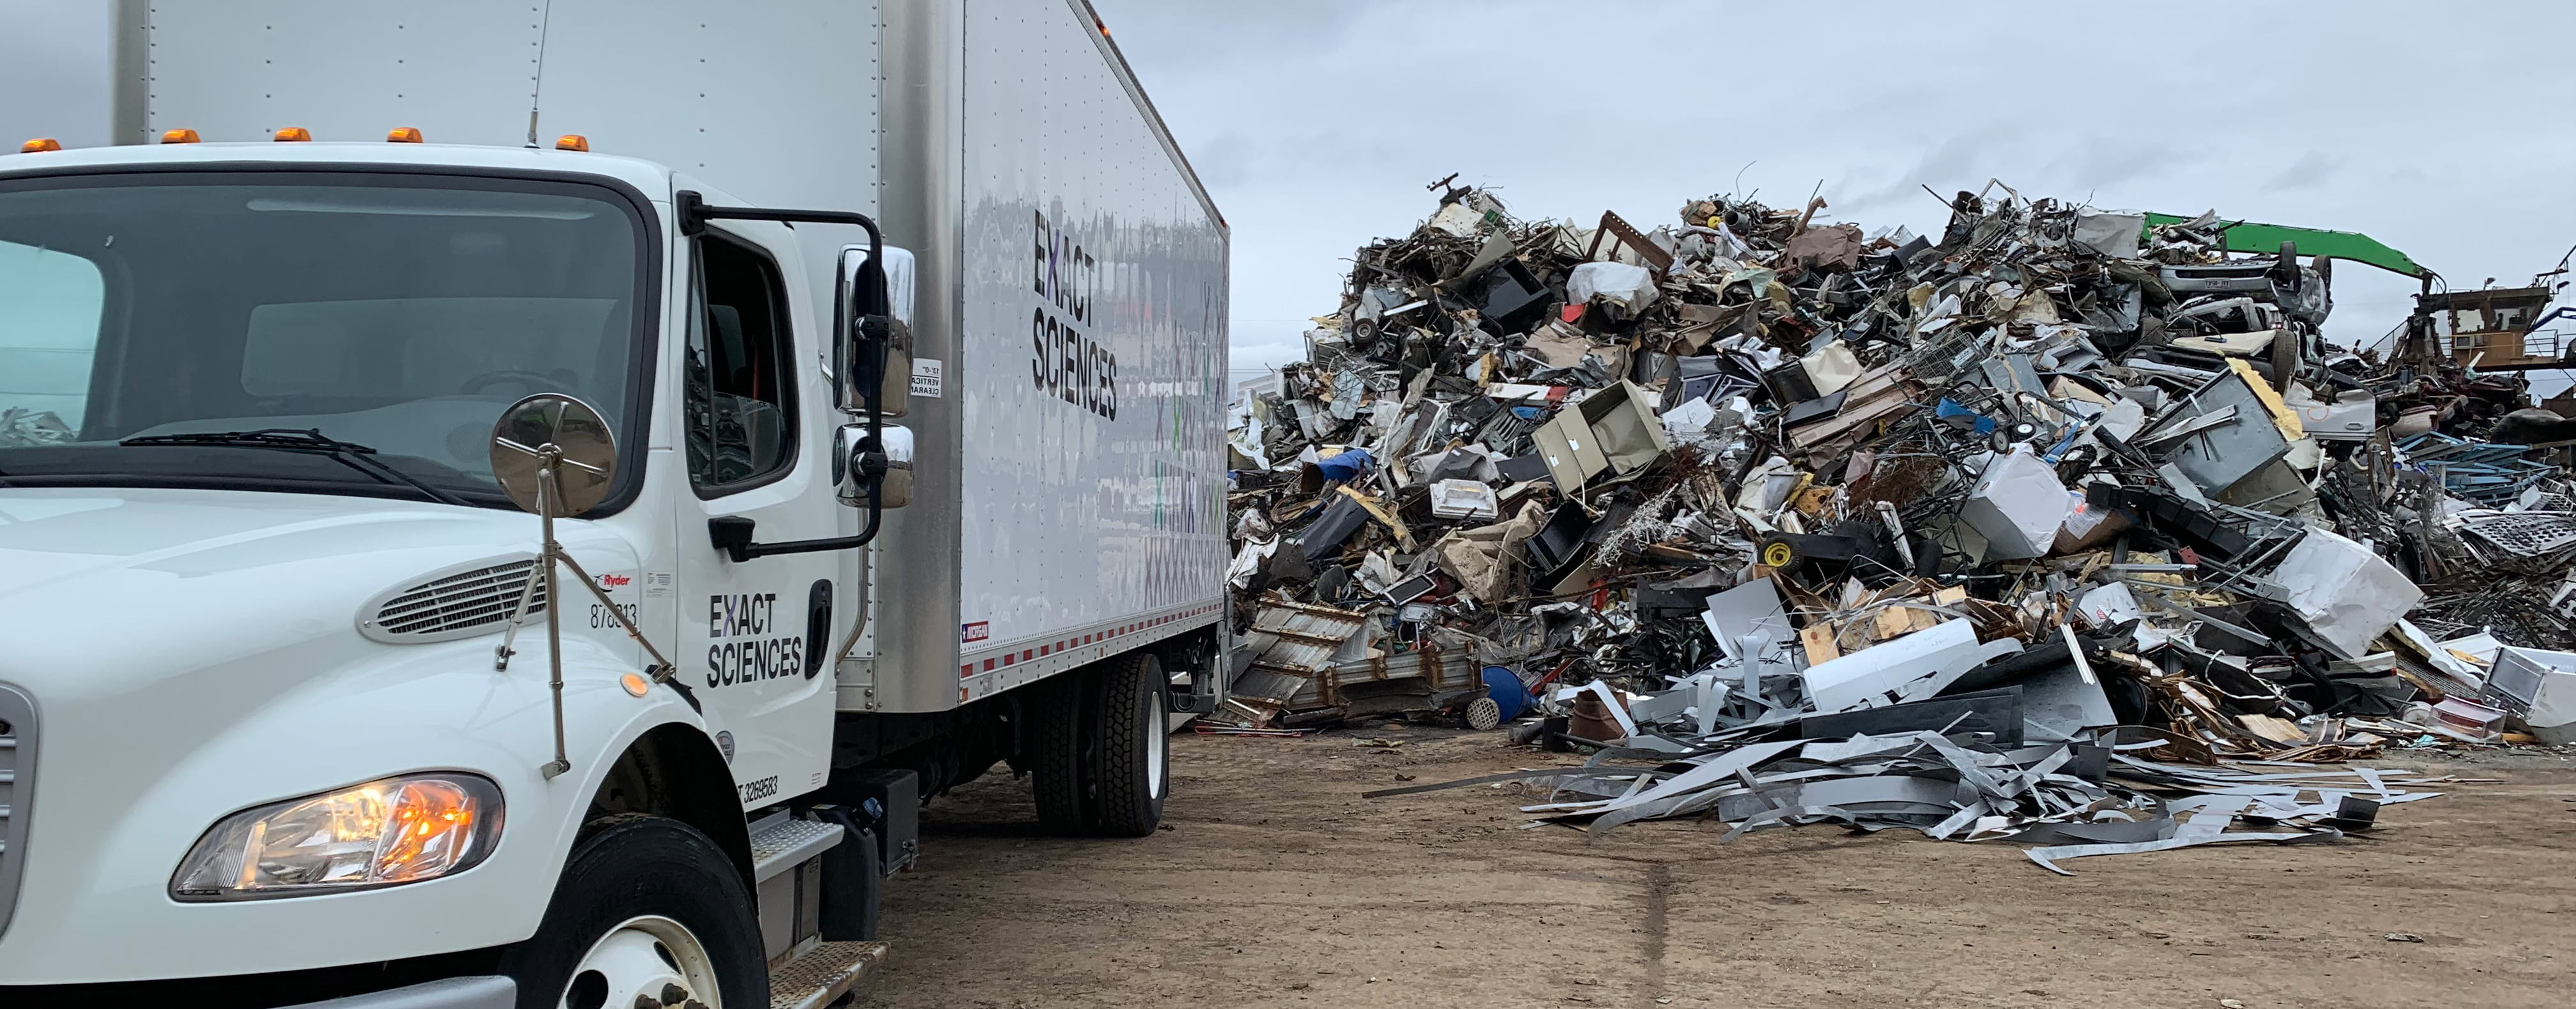 a white truck with the Exact Sciences logo next to a pile of scrap metal